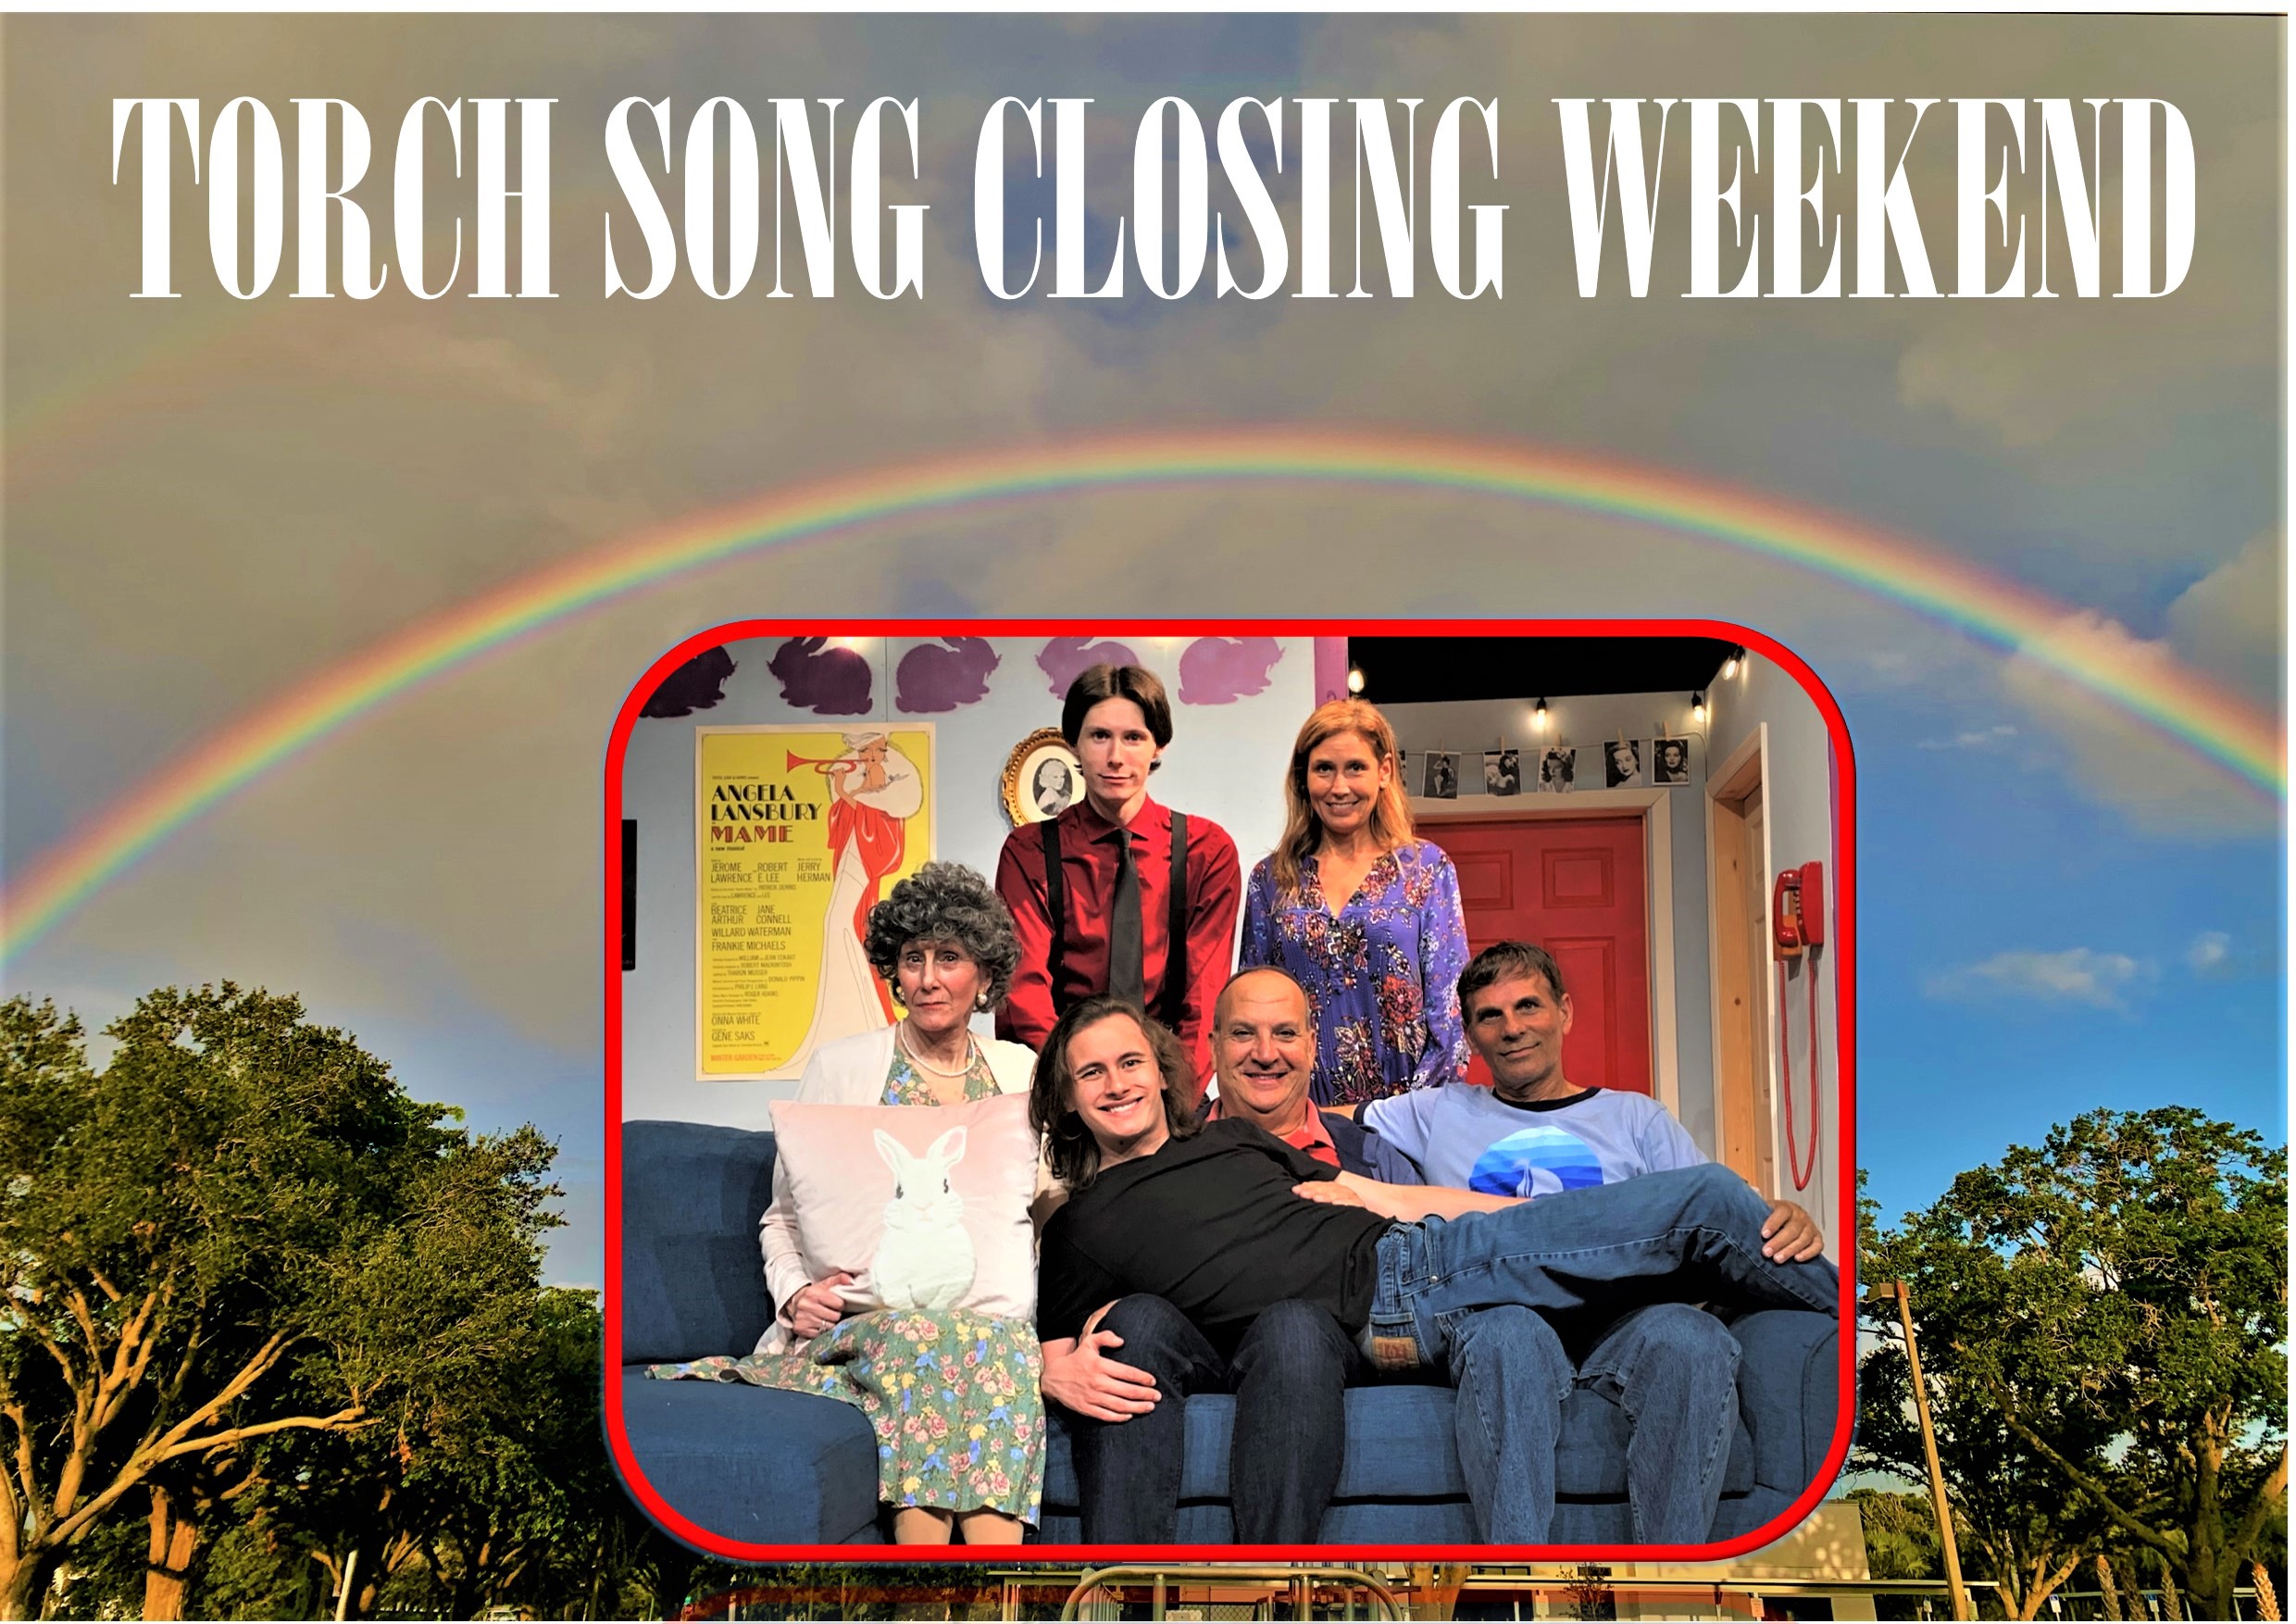 Closing weekend. Torch Song by Harvey Fierstein.
4 more performances - Thursday, Sept 23, Friday, Sept 24, Saturday Sept 25th all at 7:30pm. Closing matinee , Sunday Sept 26th 3pm.